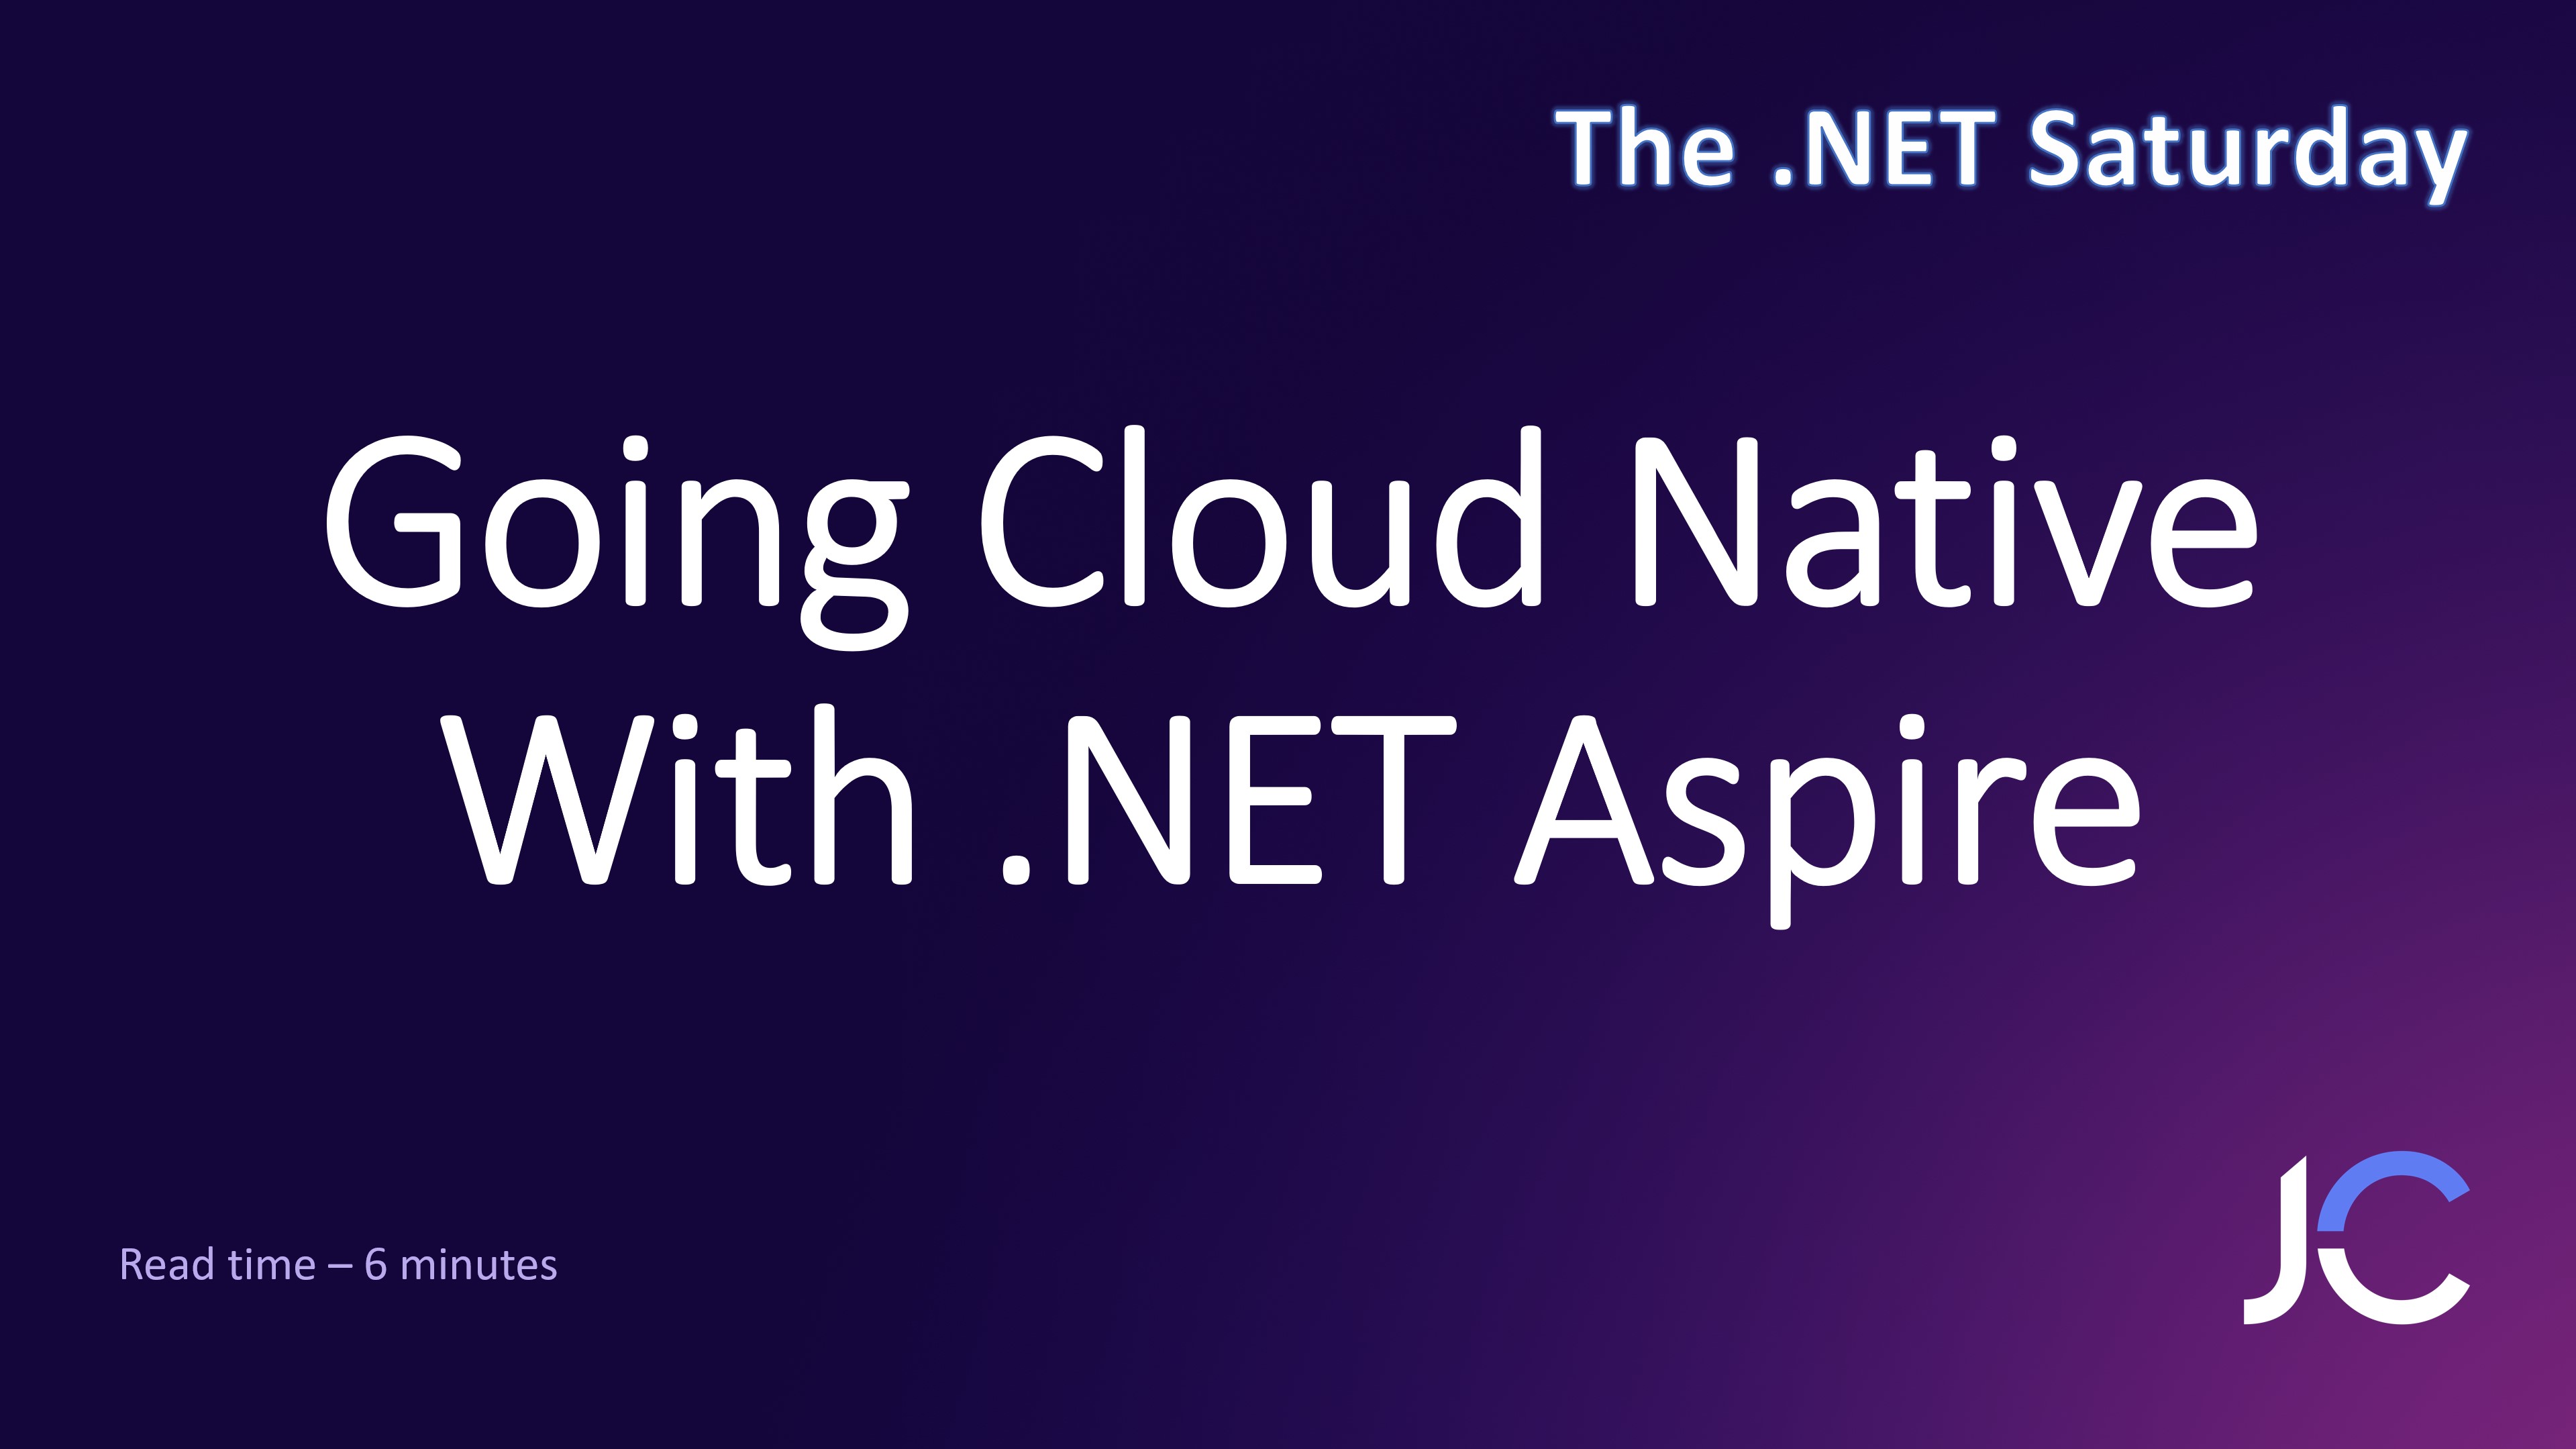 Going Cloud Native With .NET Aspire